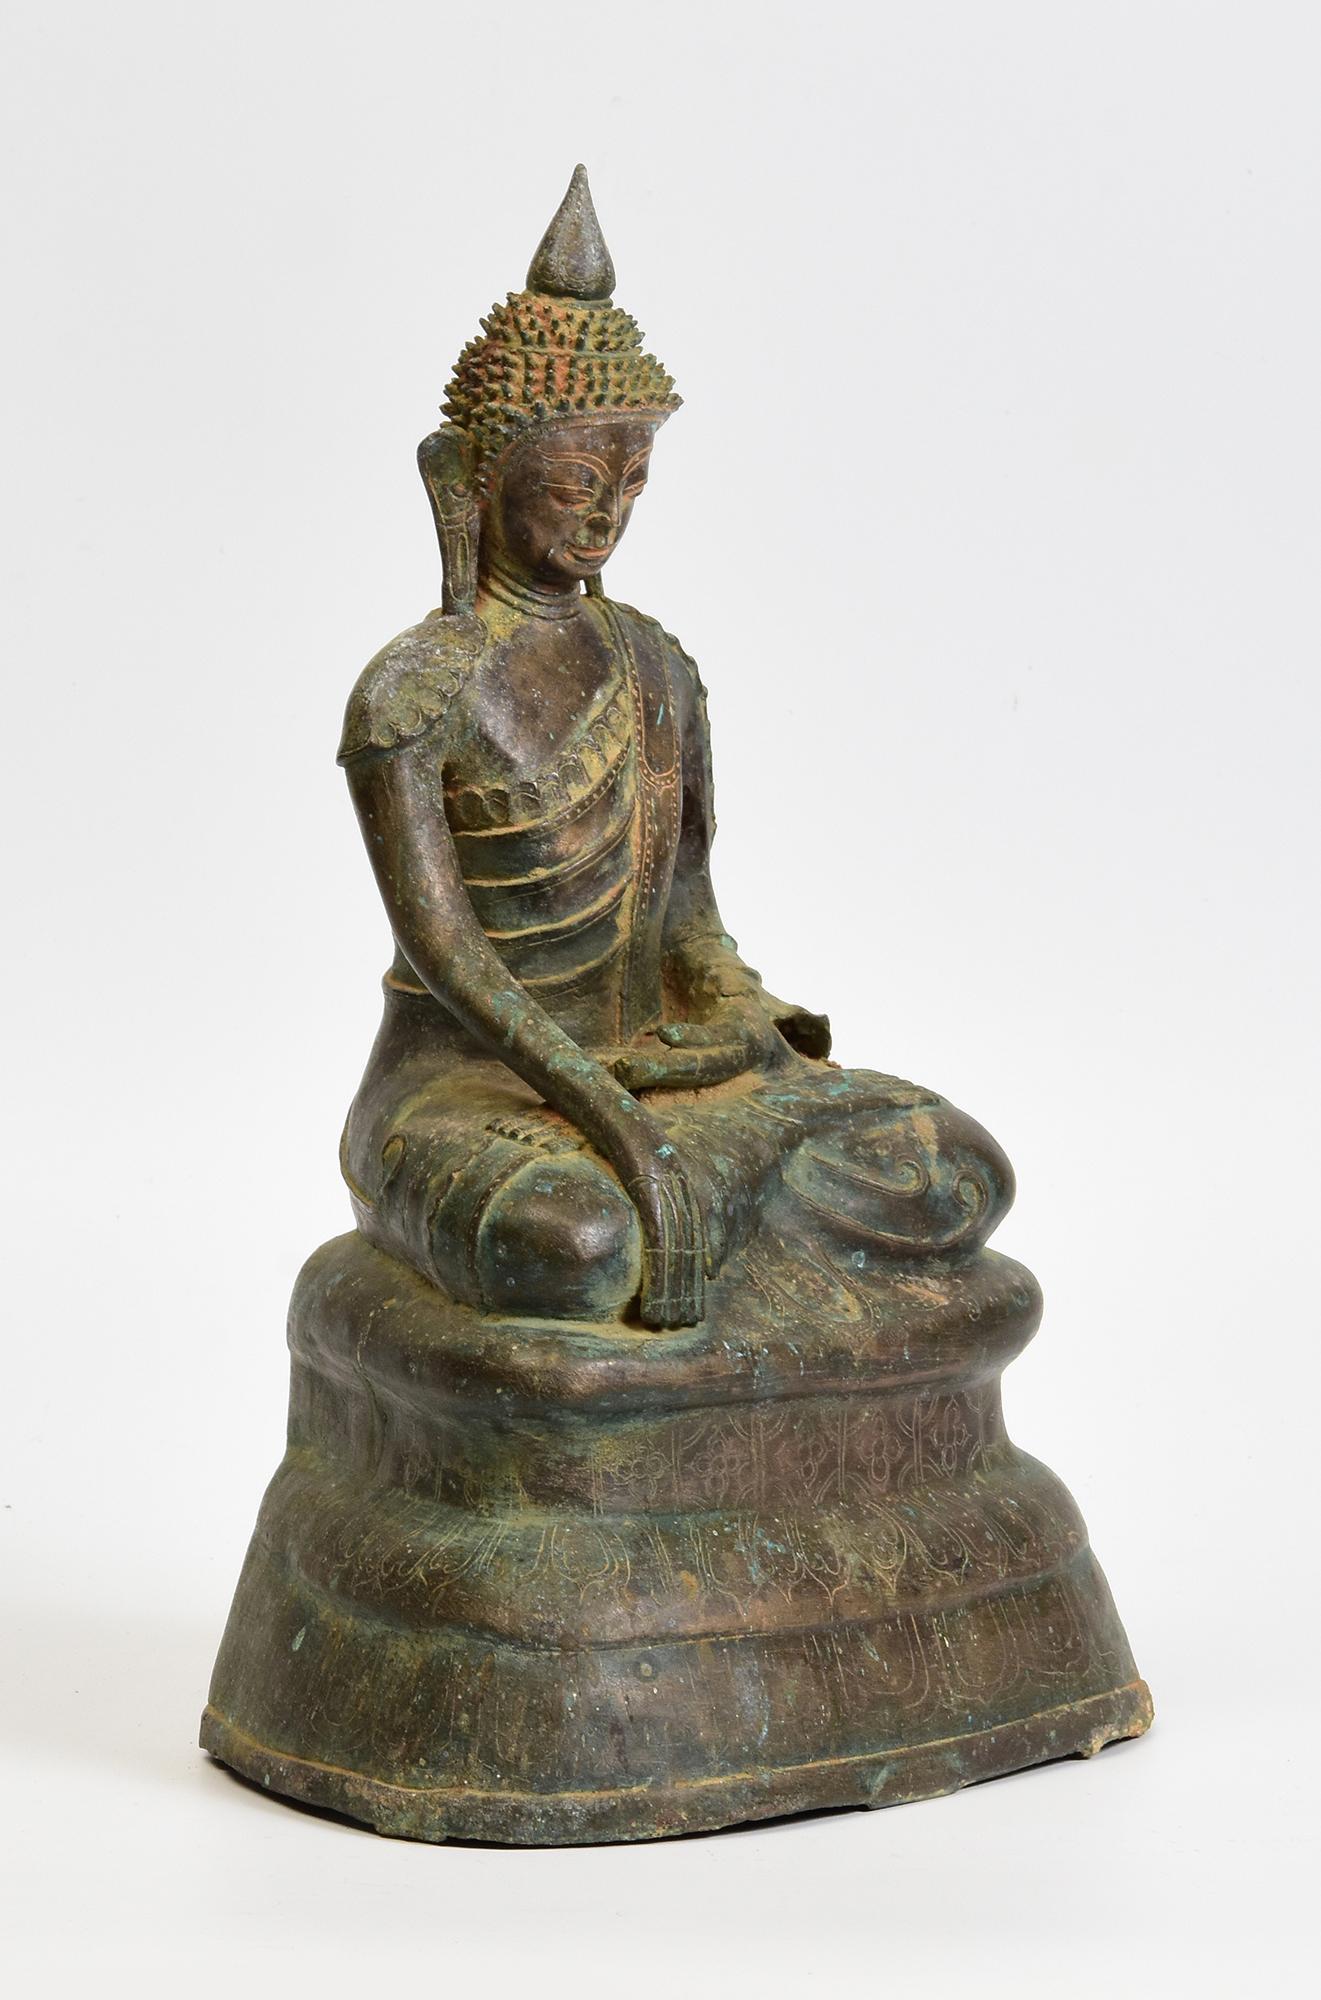 17th Century, Early Shan, Rare Antique Burmese Bronze Seated Buddha For Sale 6